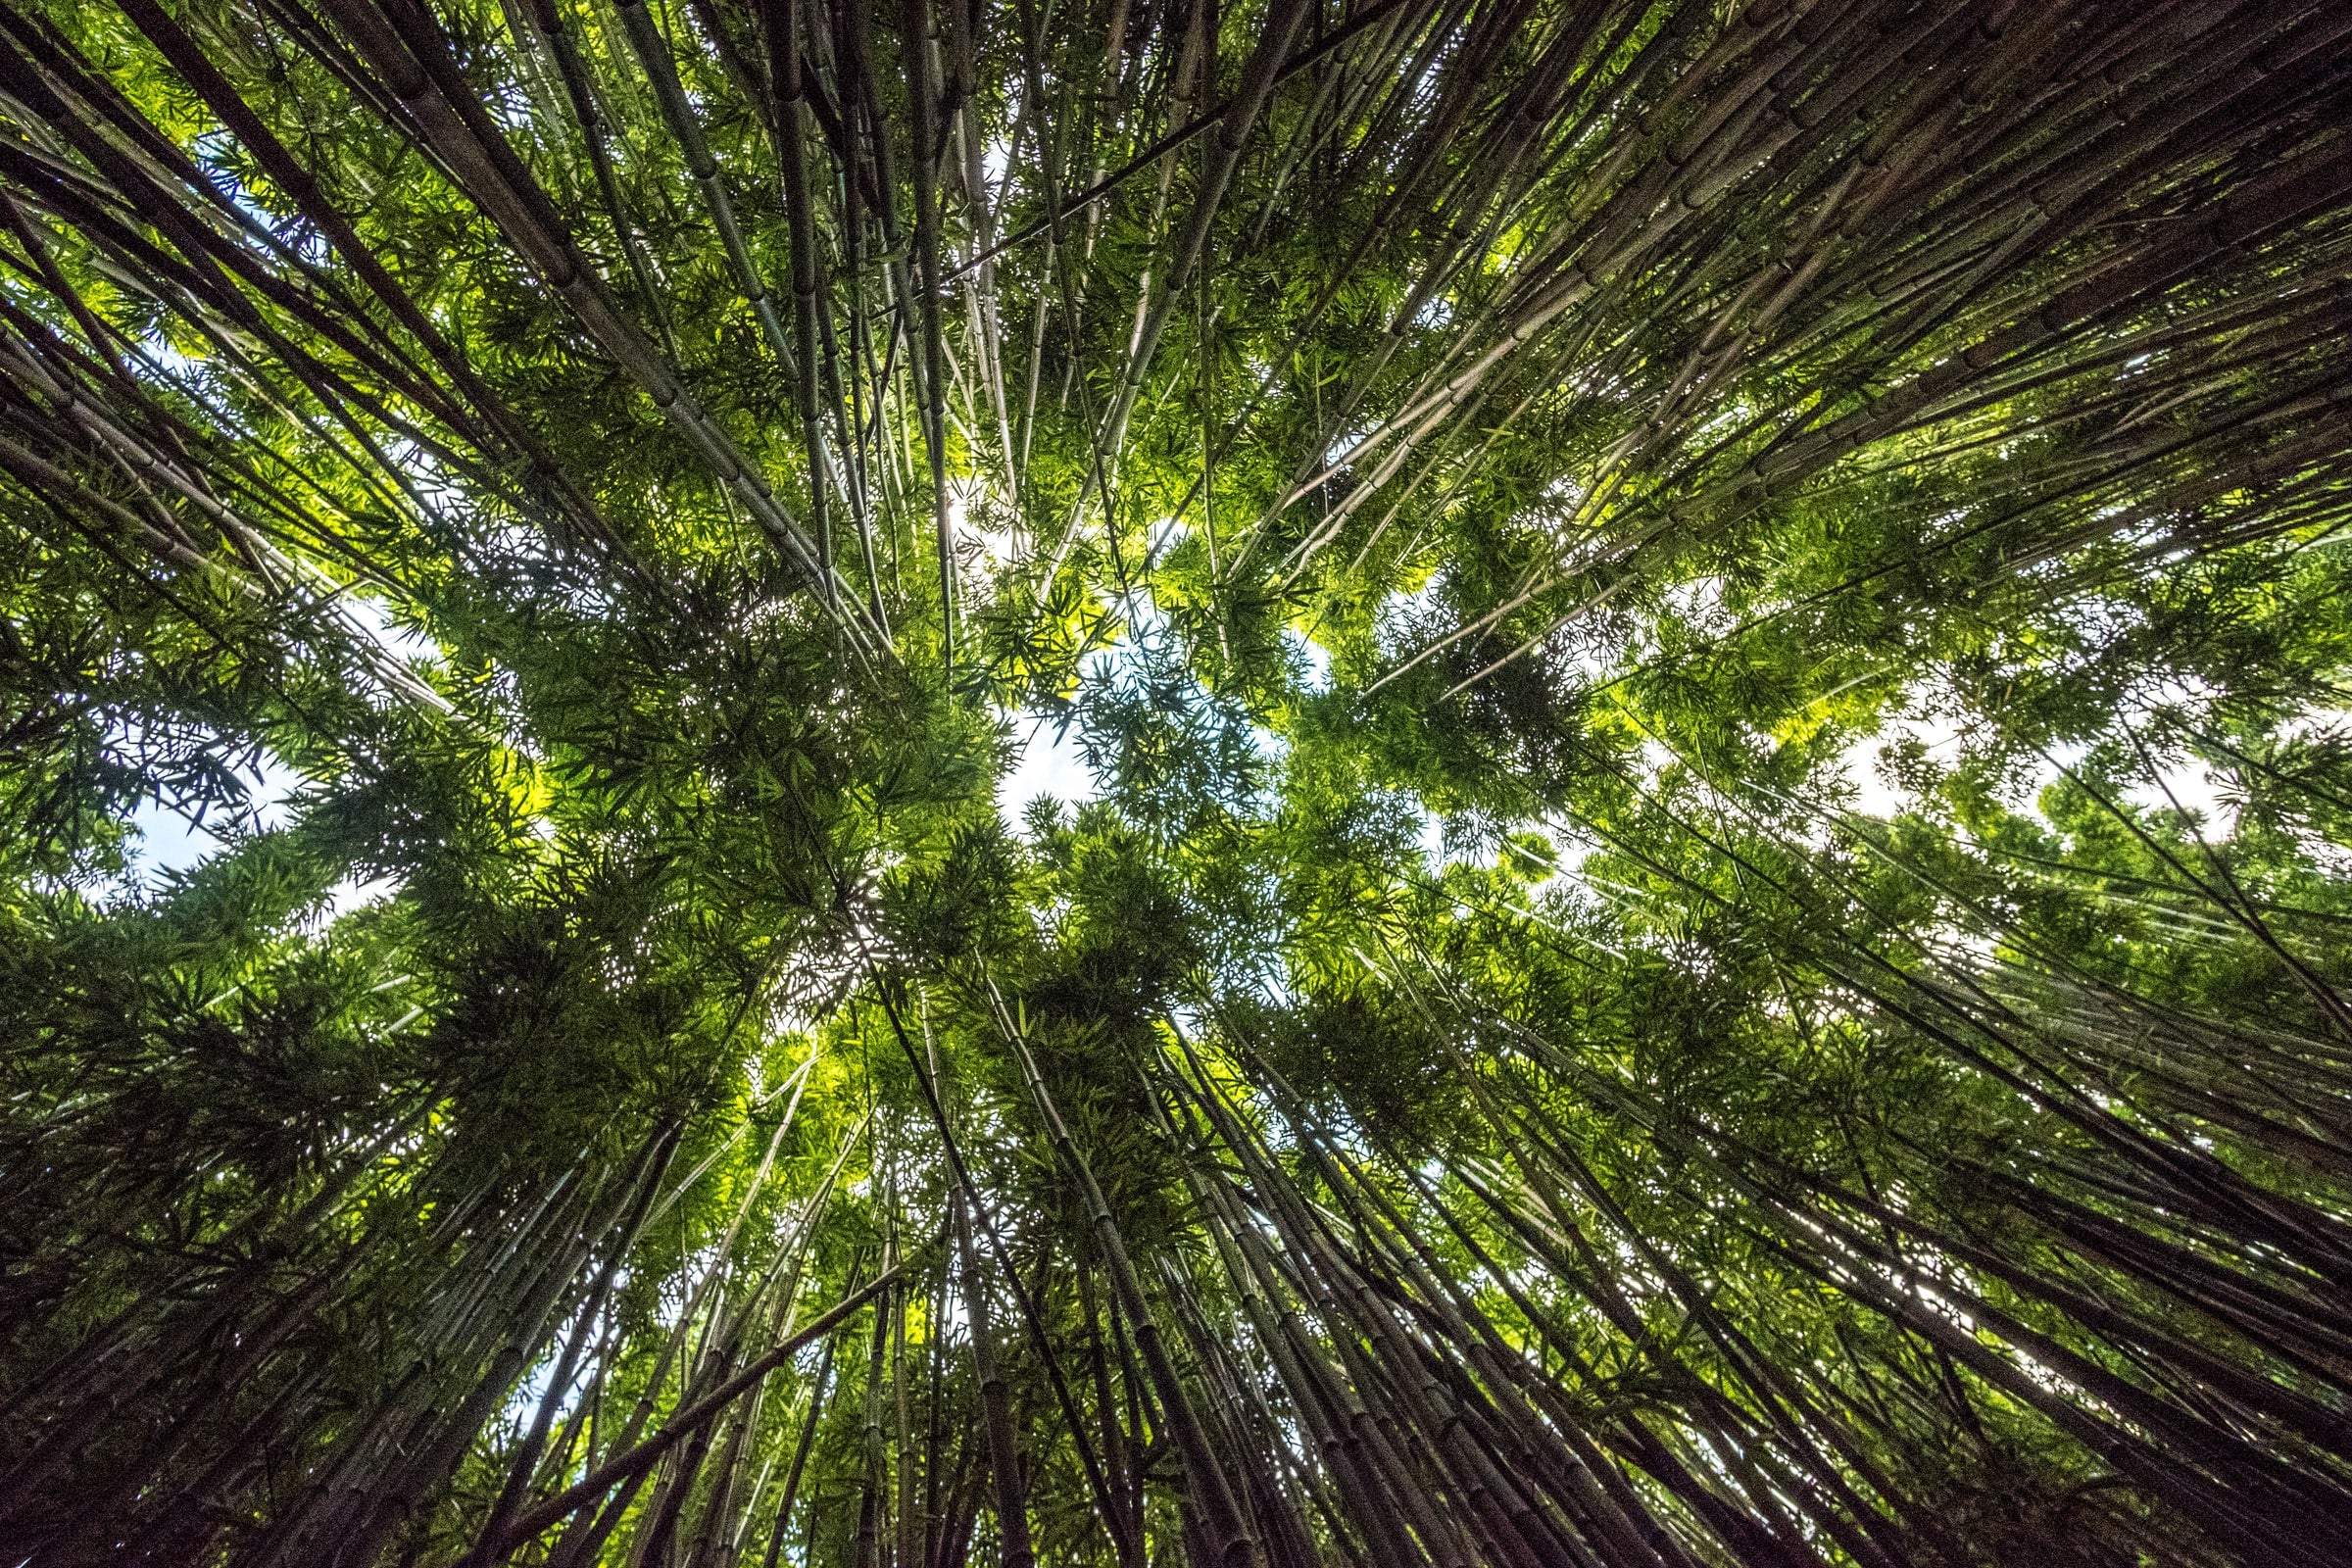 Looking up into the trees